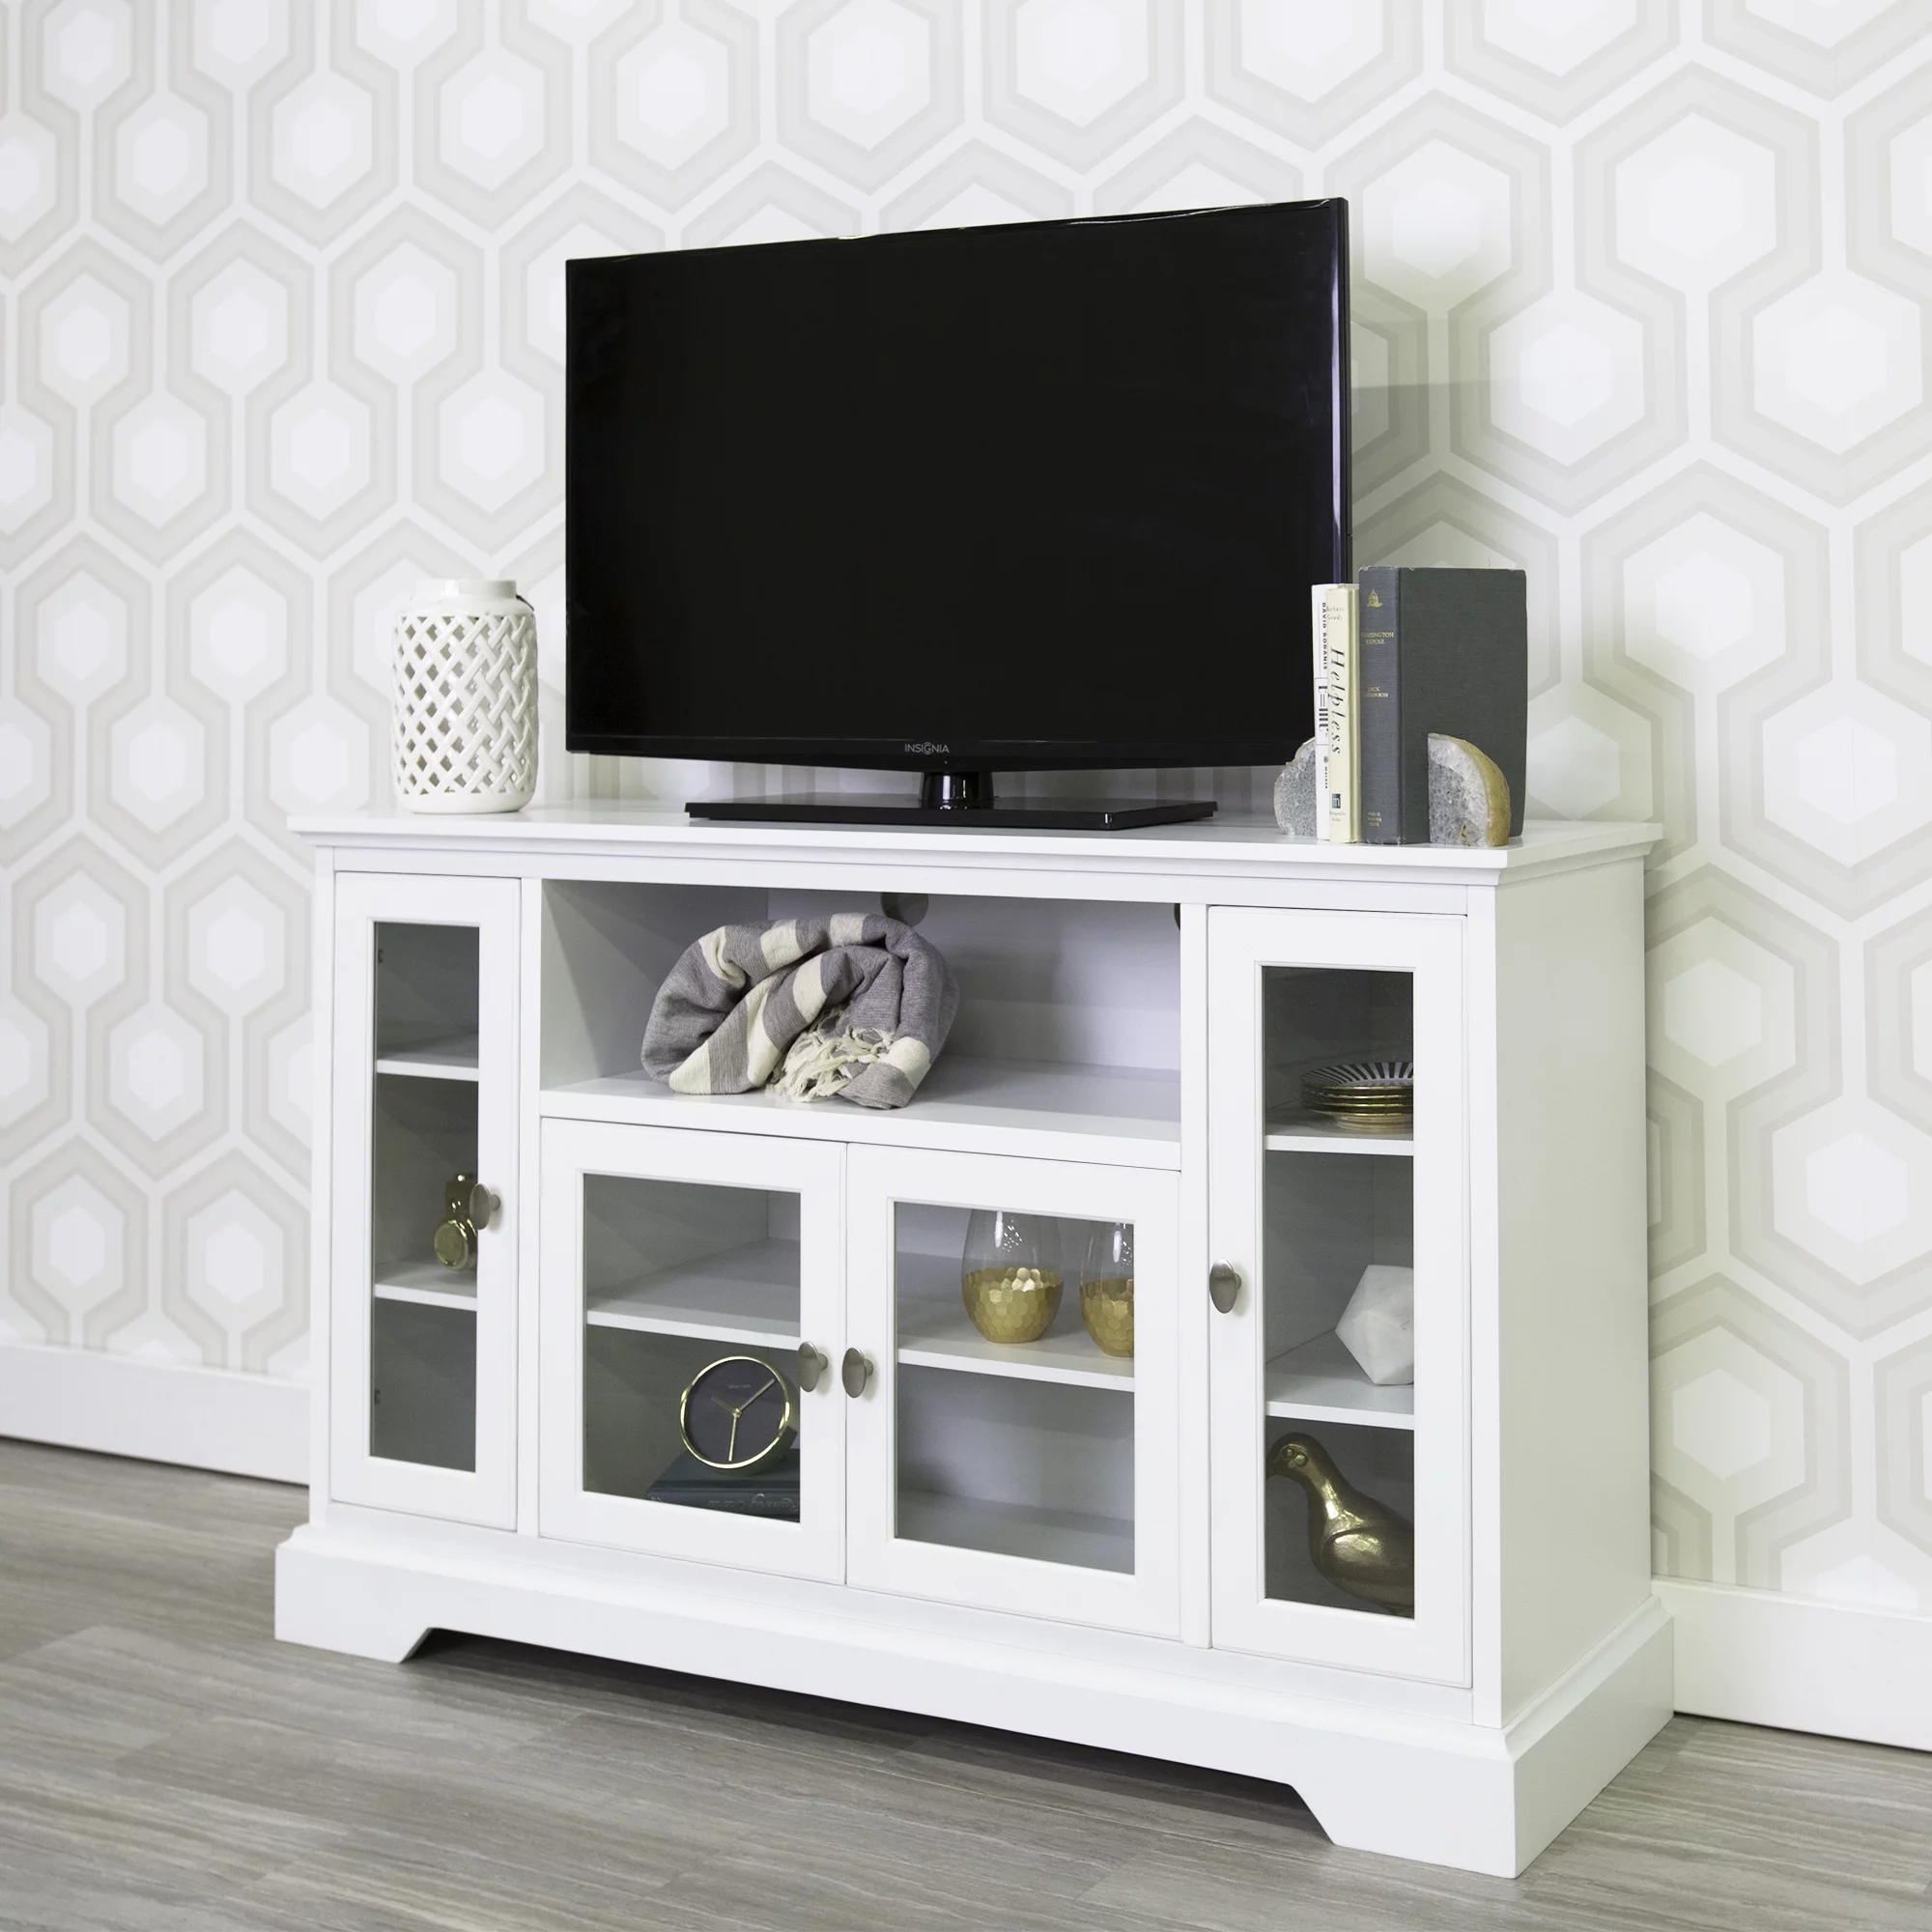 Walker Edison Highboy-Style Wood Media Storage TV Stand Console for TVs up to 55", White